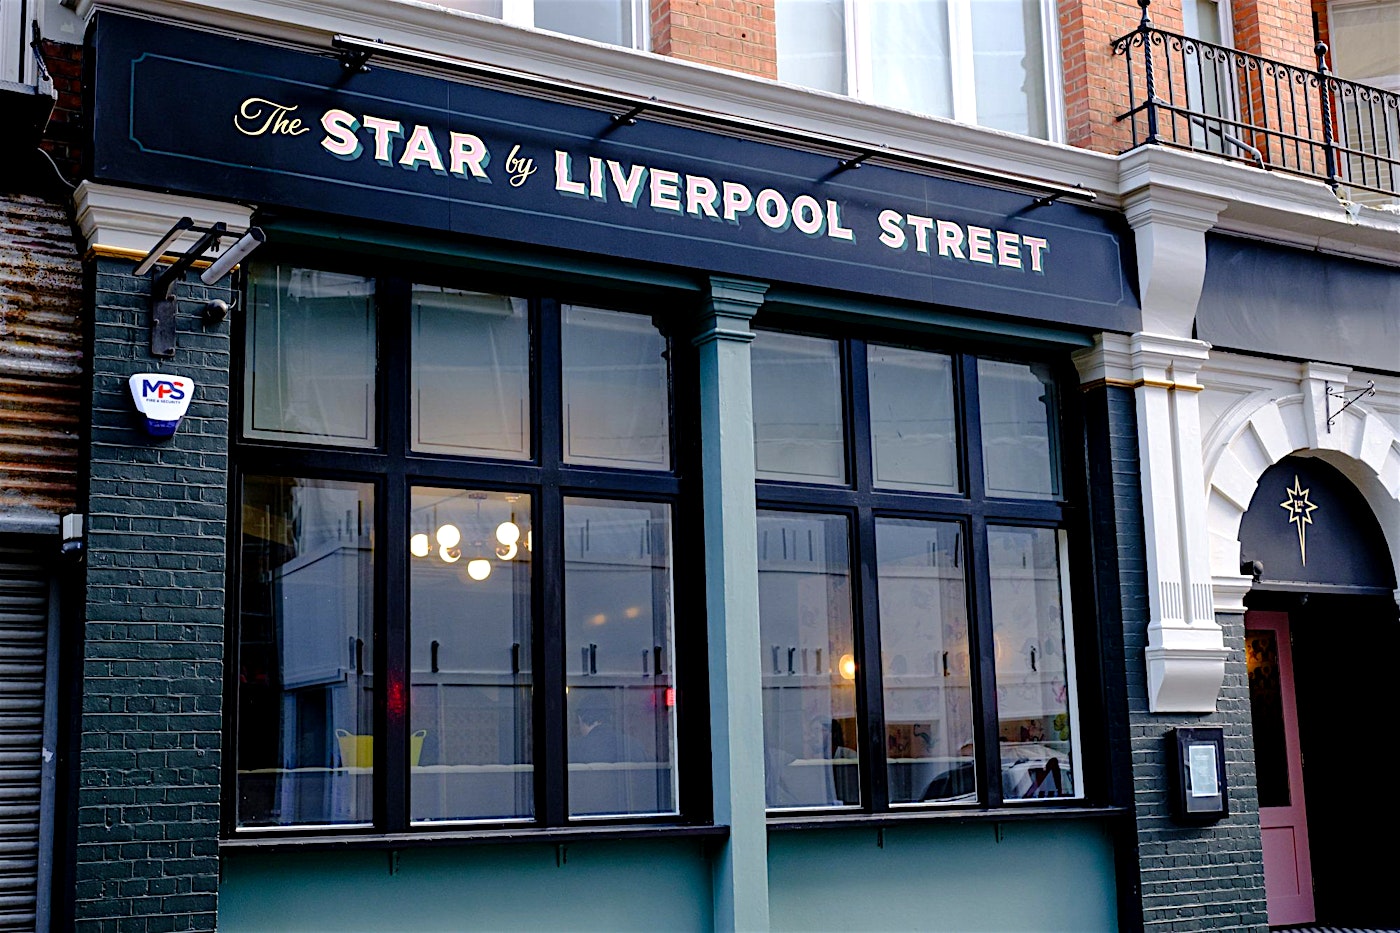 The Star by Liverpool Street